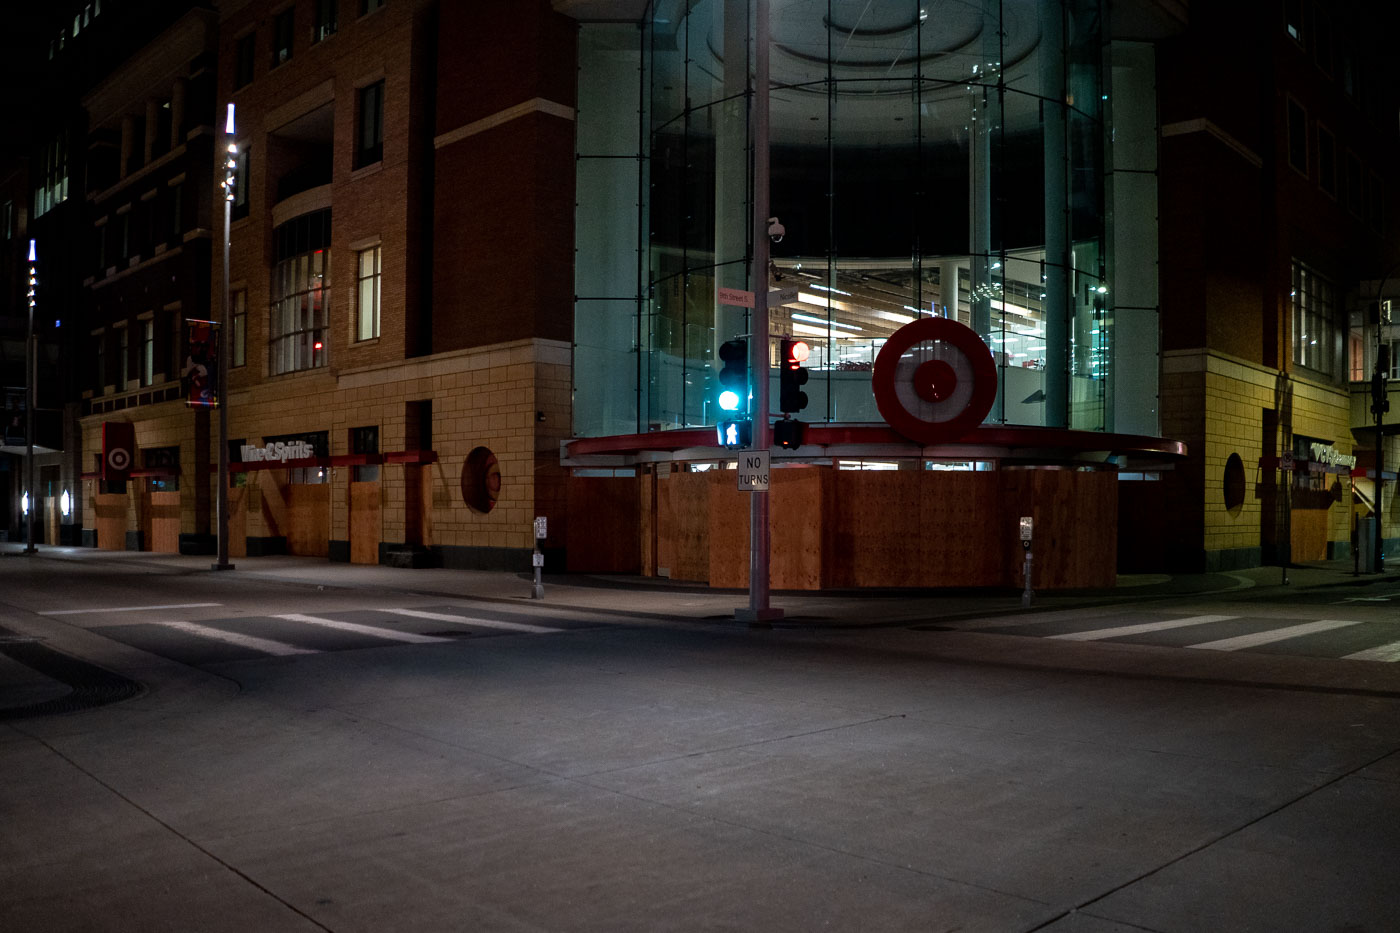 Boarded up target store in minneapolis